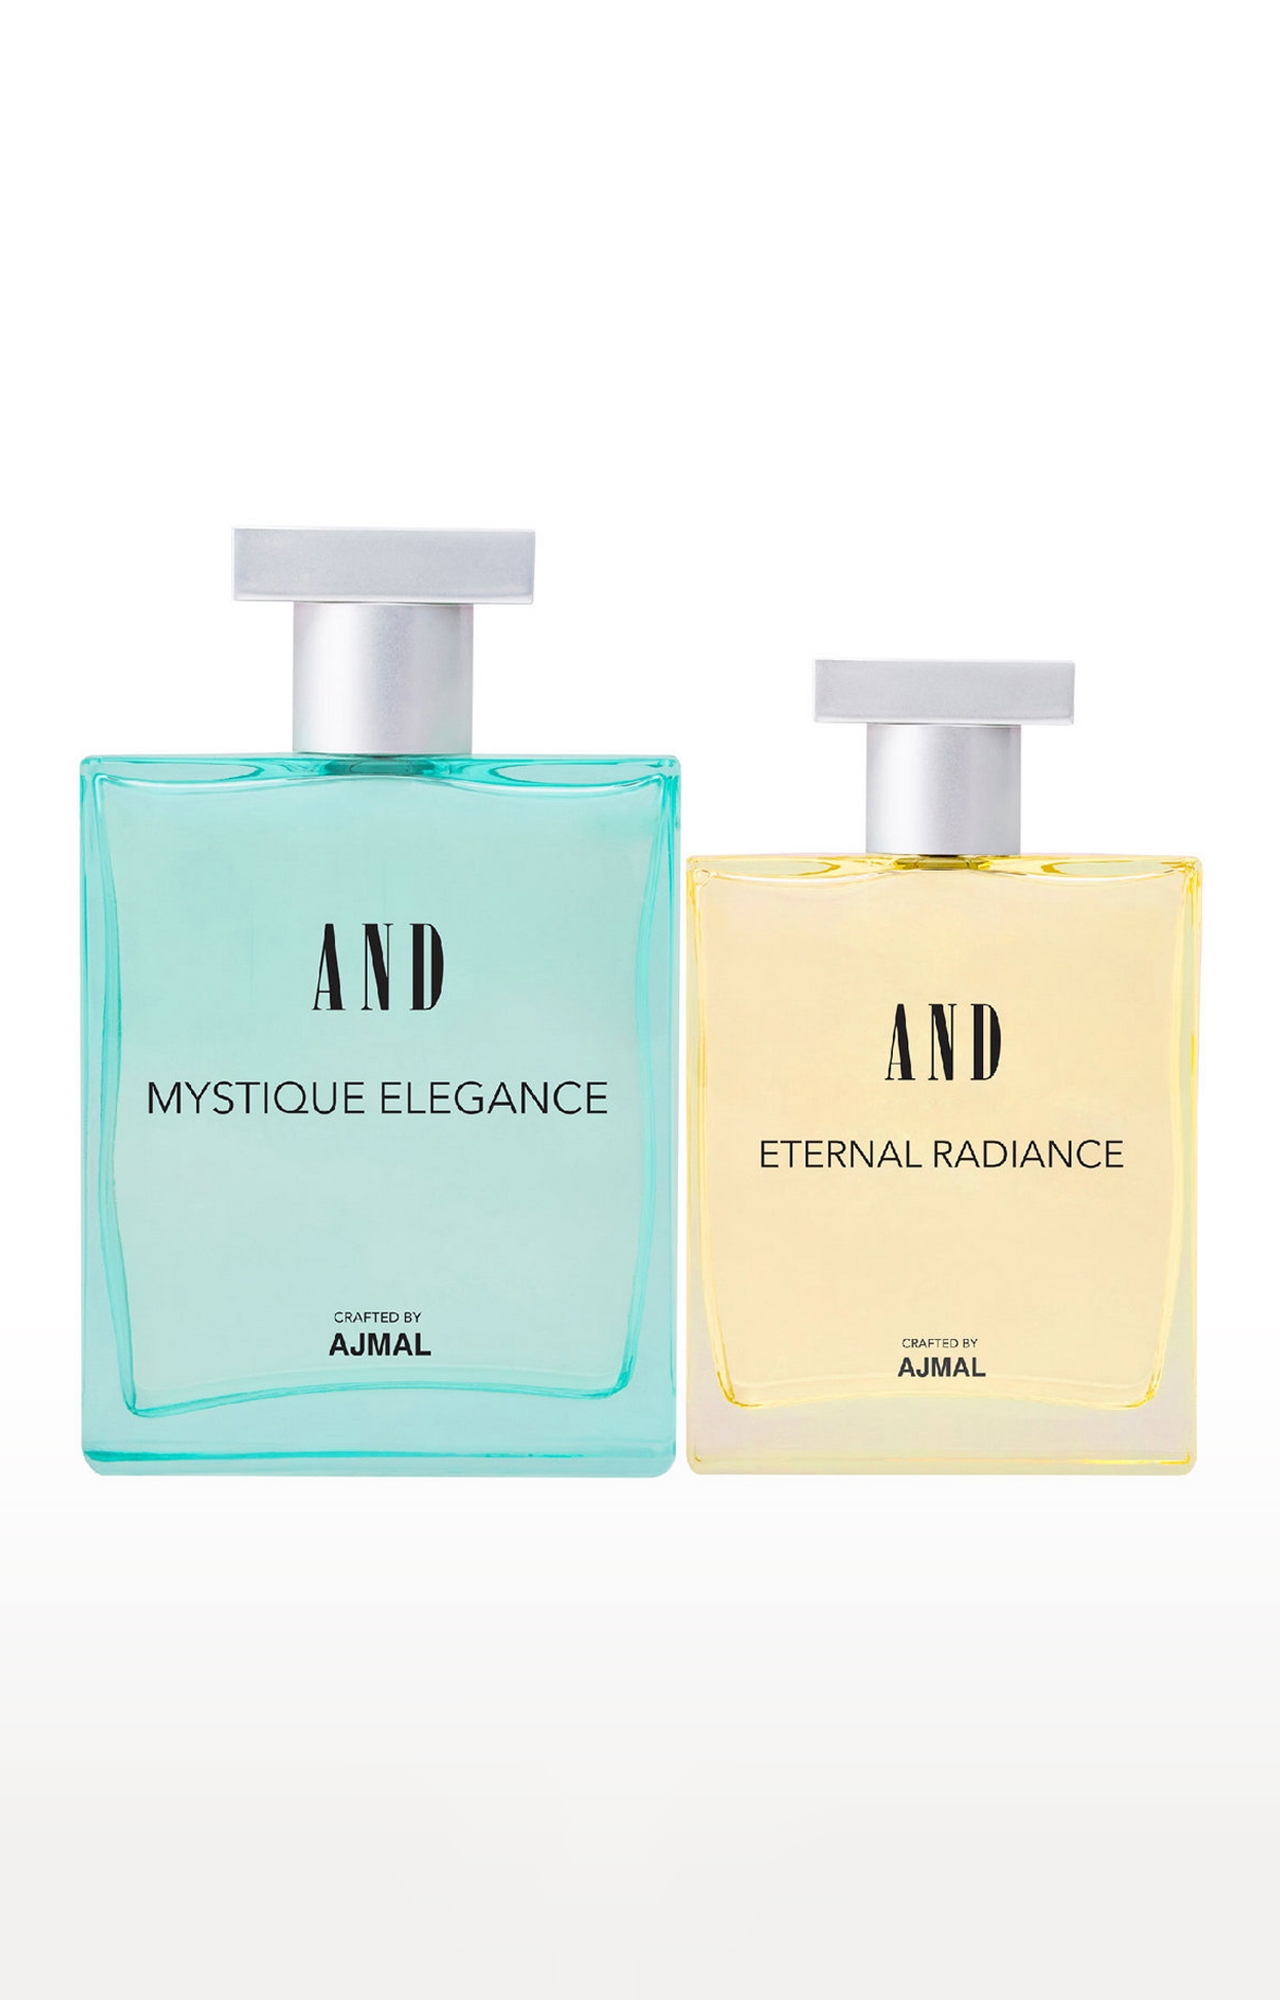 AND Mystique Elegance 100ML & Eternal Radiance 50ML Pack of 2 Eau De Parfum for Women Crafted by Ajmal 